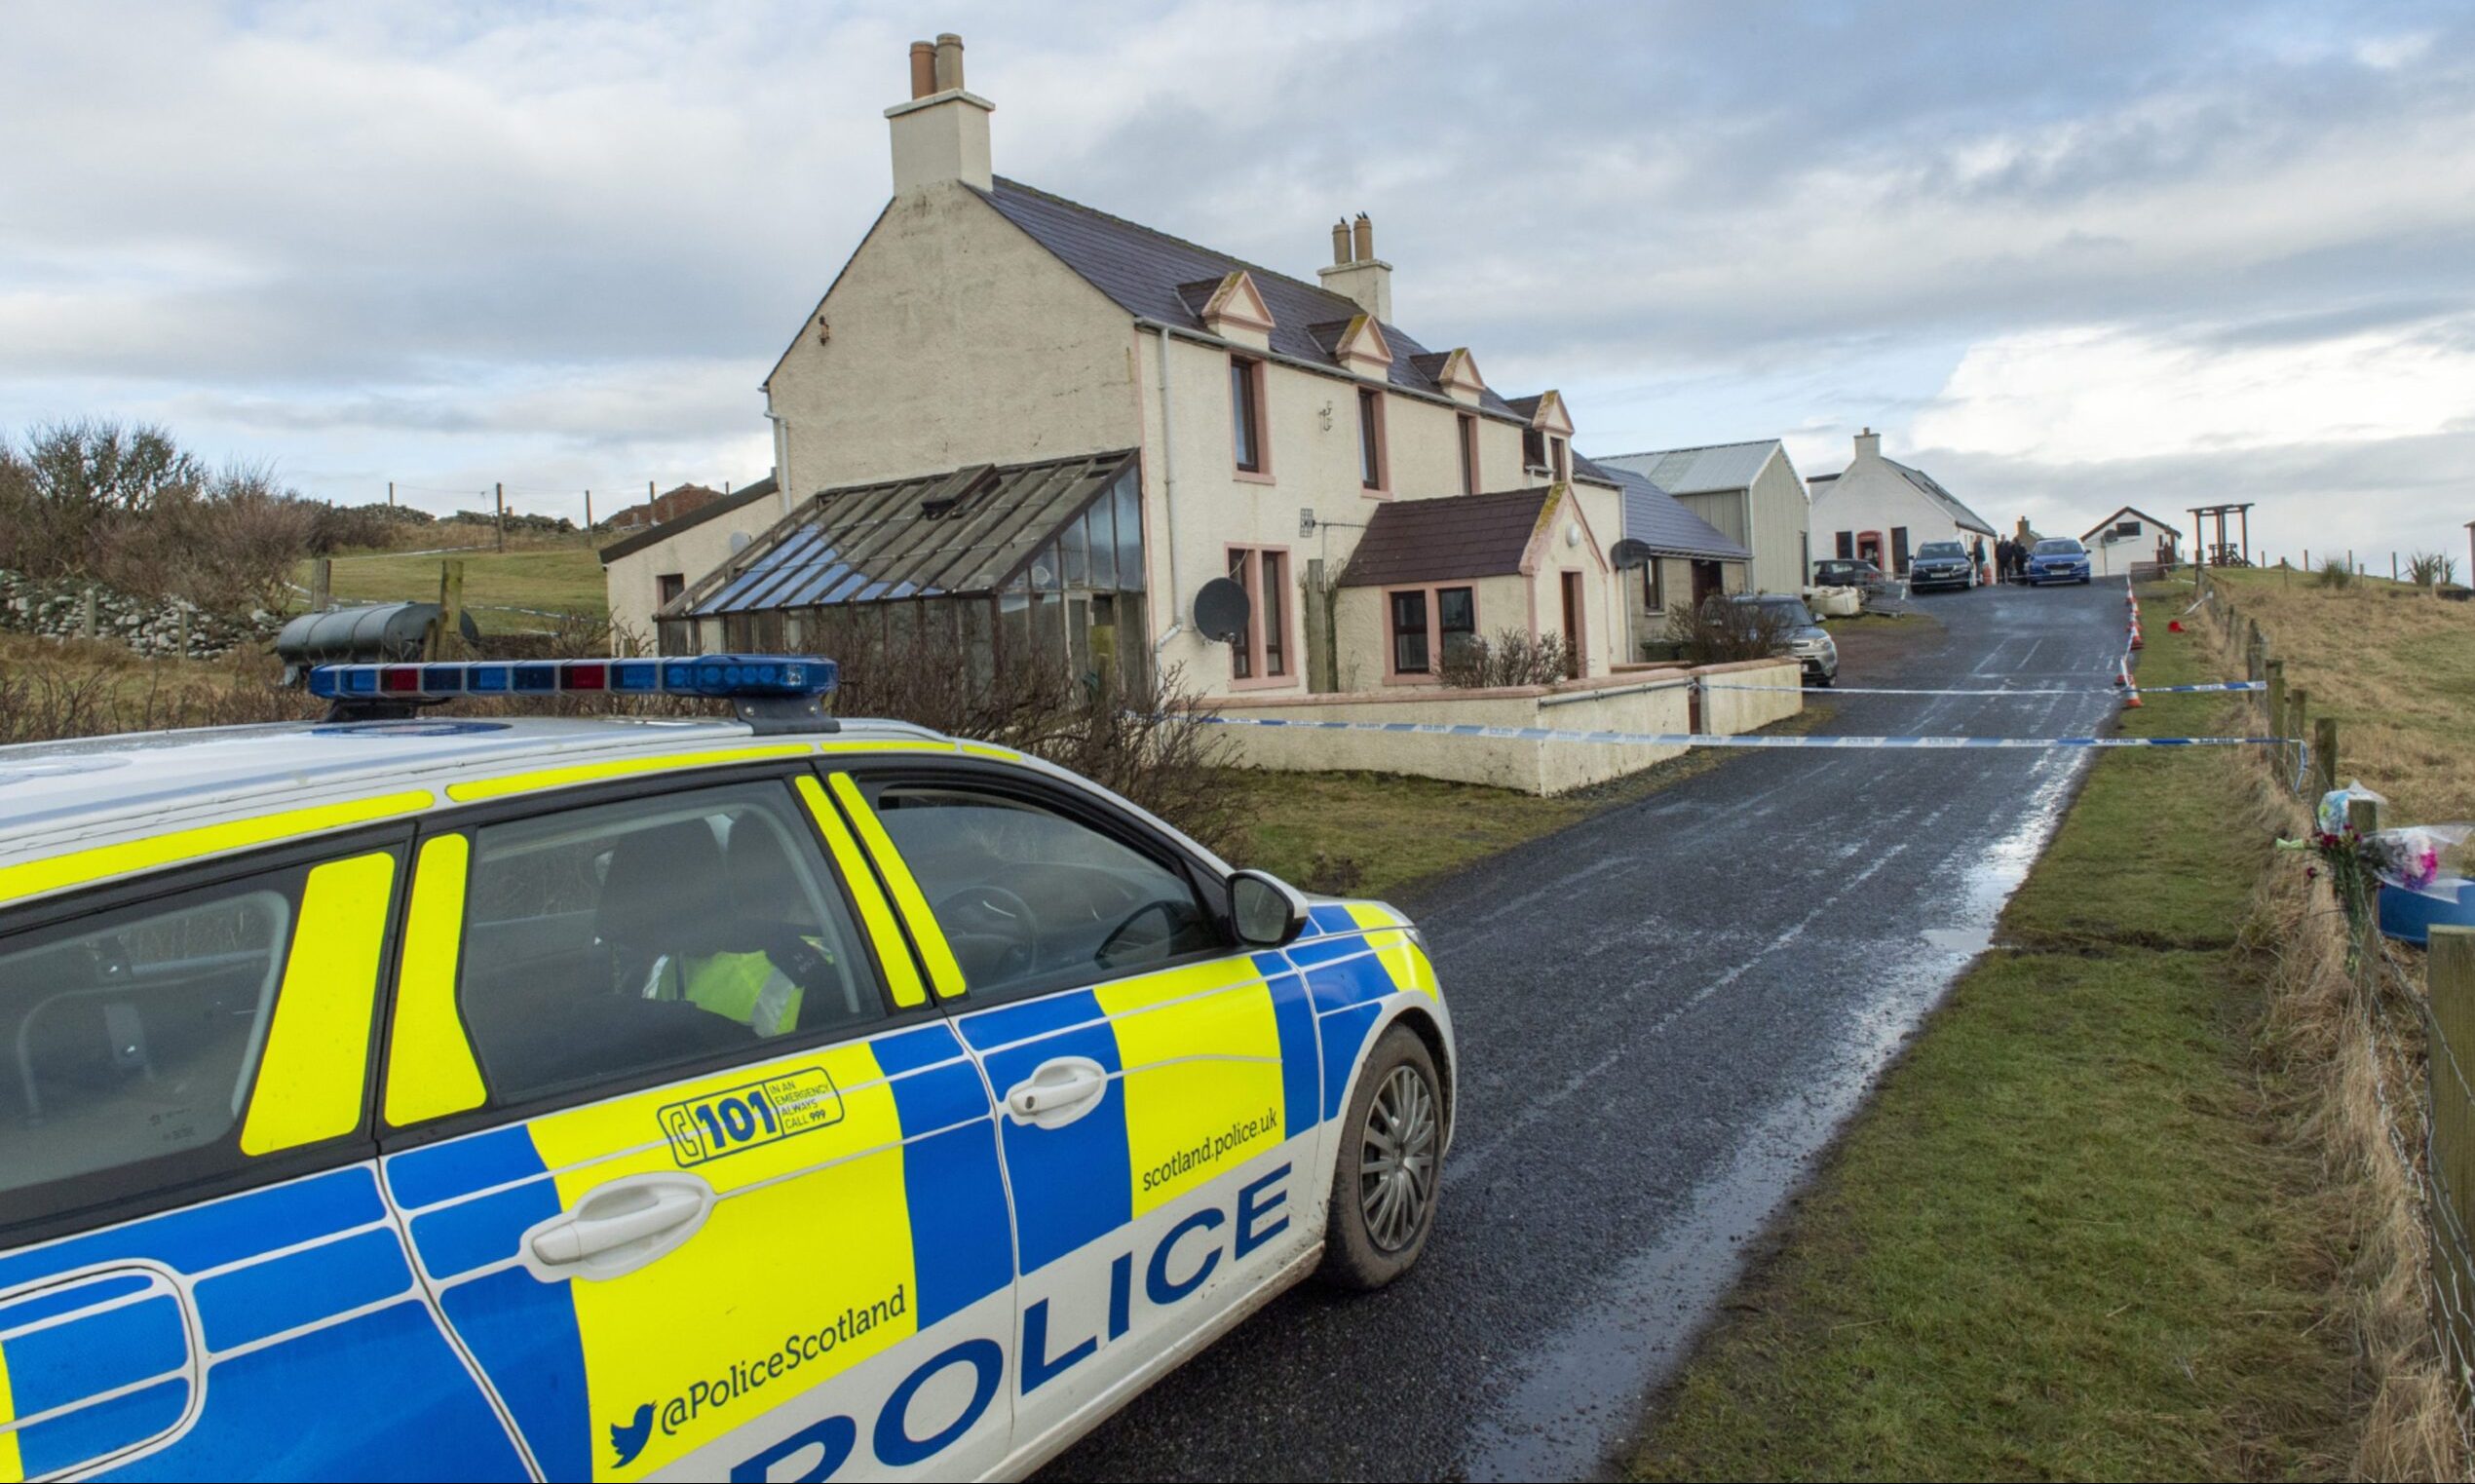 Police car at the scene of the incidents in Sandness, Shetland.